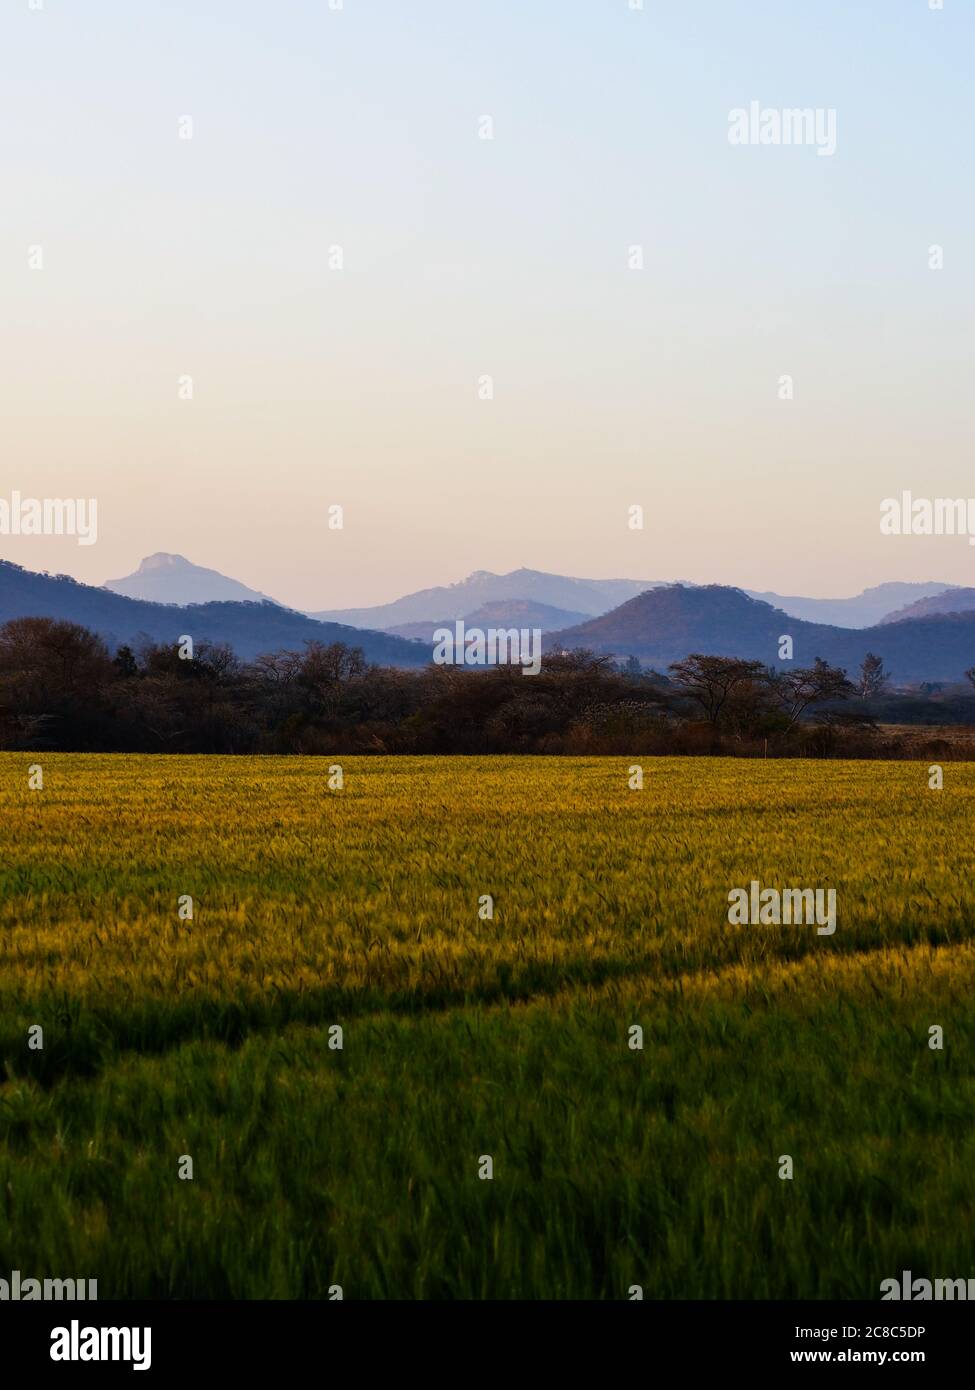 Landscape image of mountains in the background with wheat fore ground Stock Photo